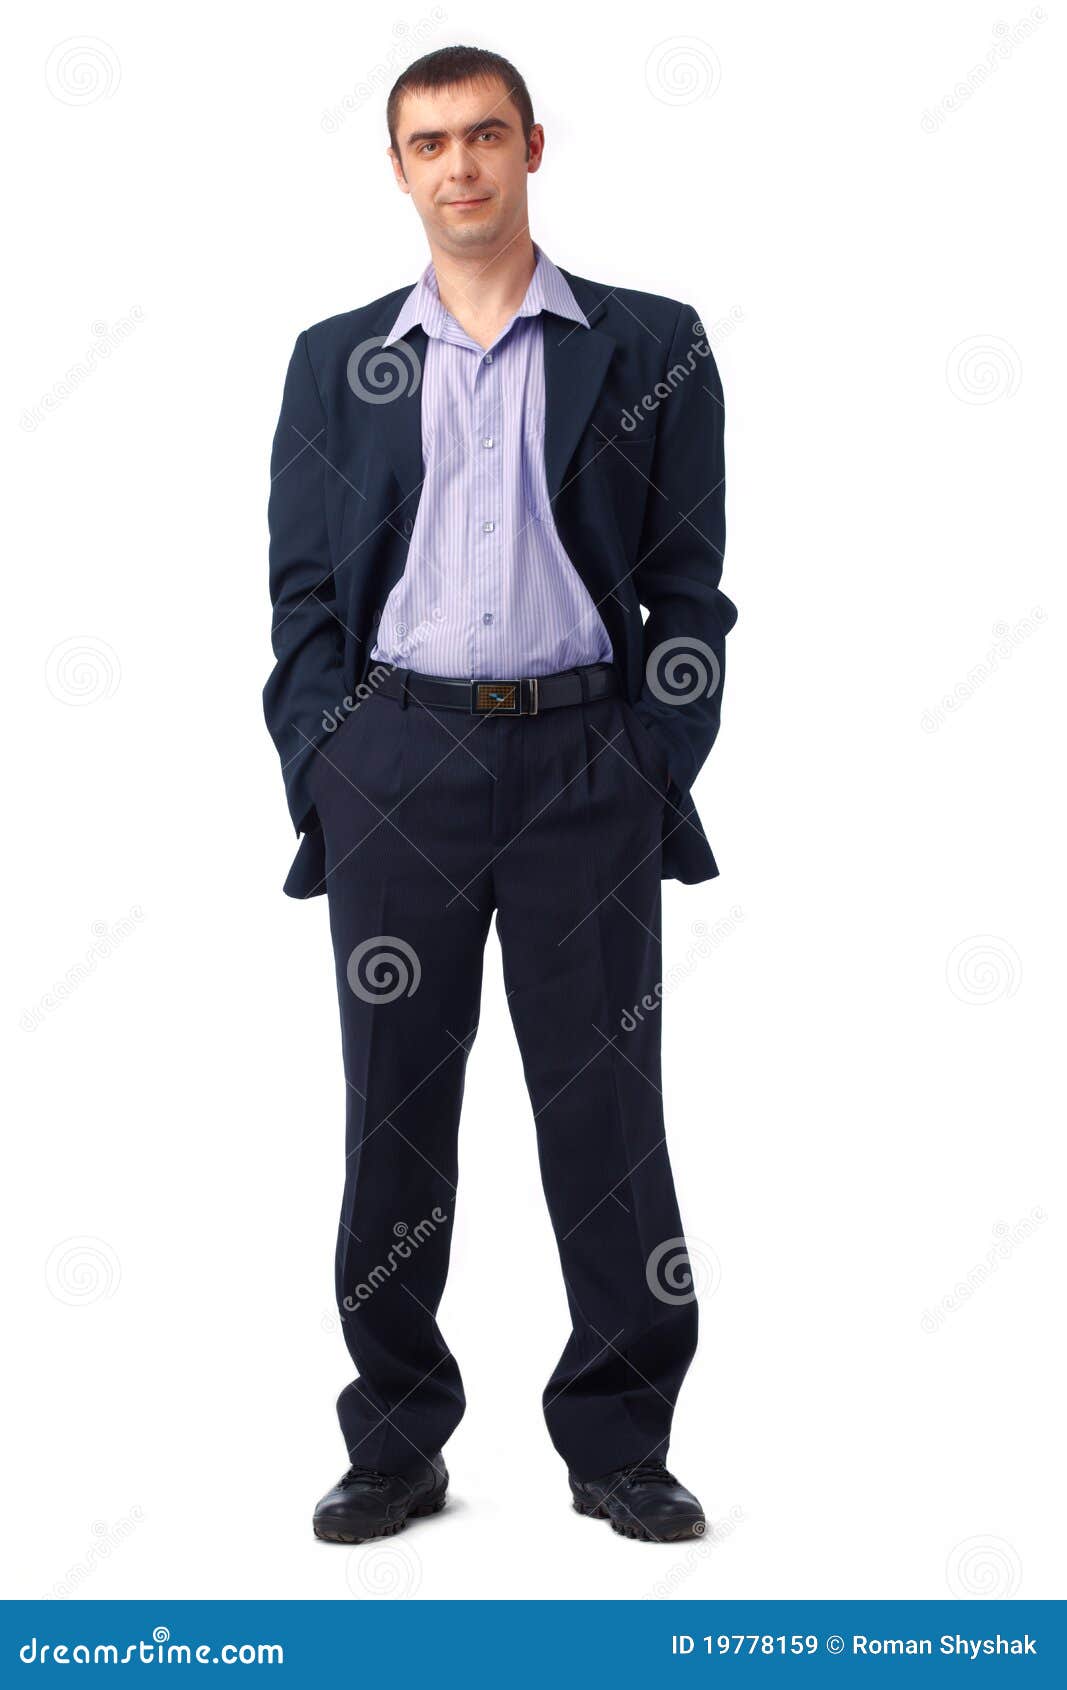 Hands In Pockets Royalty Free Stock Images - Image: 19778159